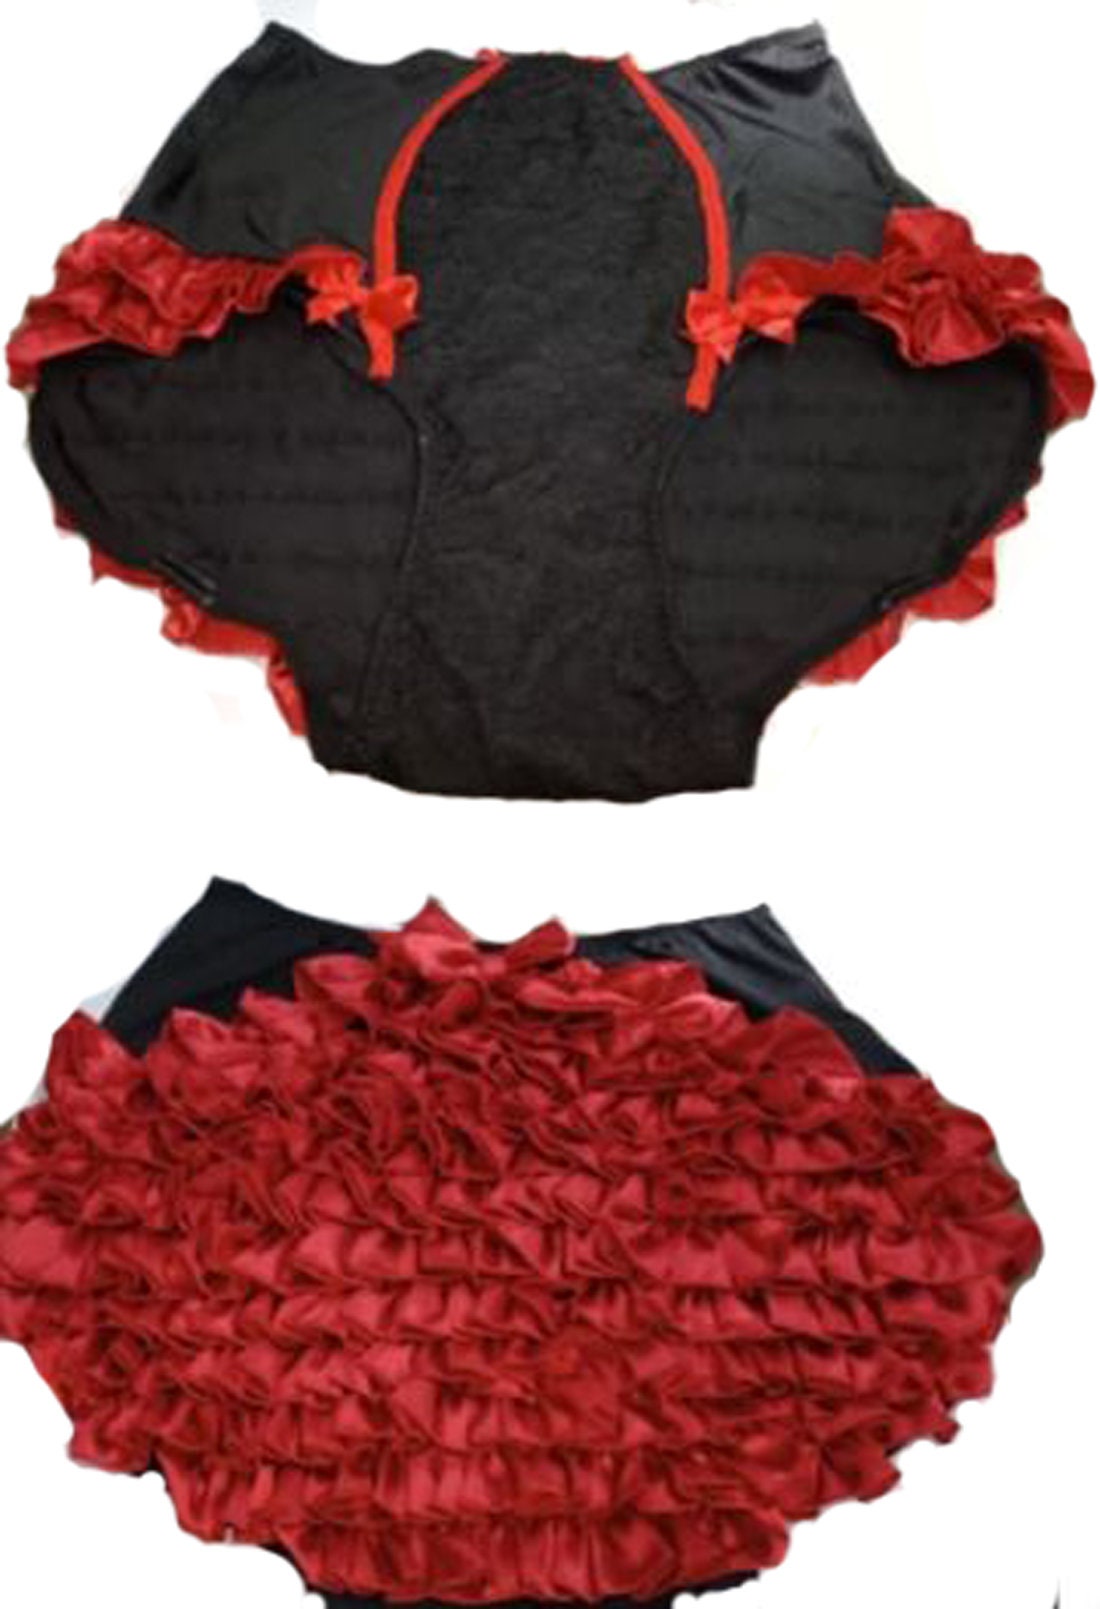 Queen Burlesque High Waist Retro Knicker With Lots of Frills, Stretch Booty  Hot Pants Fancy Show Girl Dress Costume. 4 Suspenders Included 